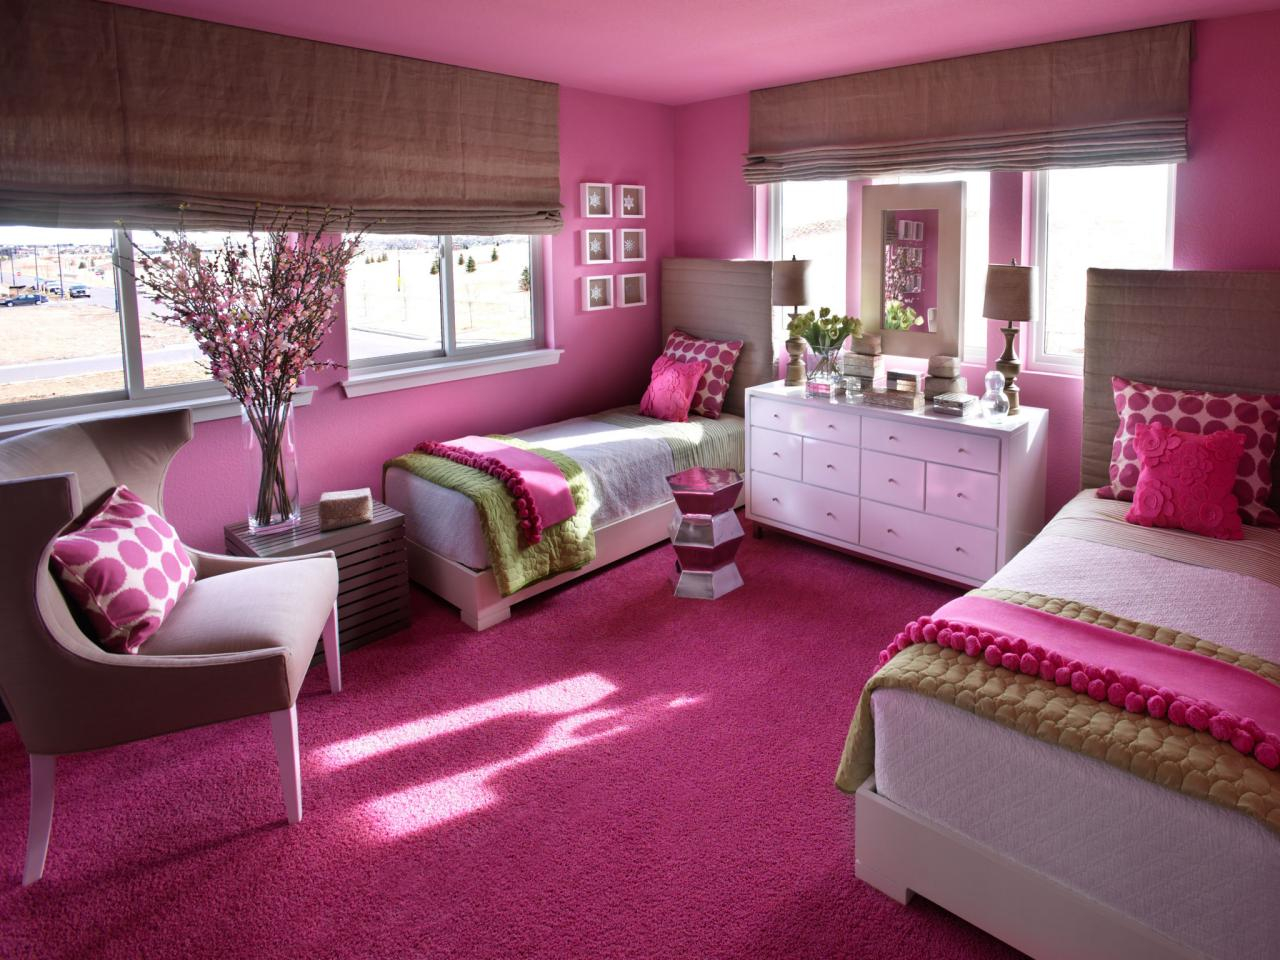 Terrific Teenage Bedroom Color Schemes Pictures Options Ideas with regard to sizing 1280 X 960